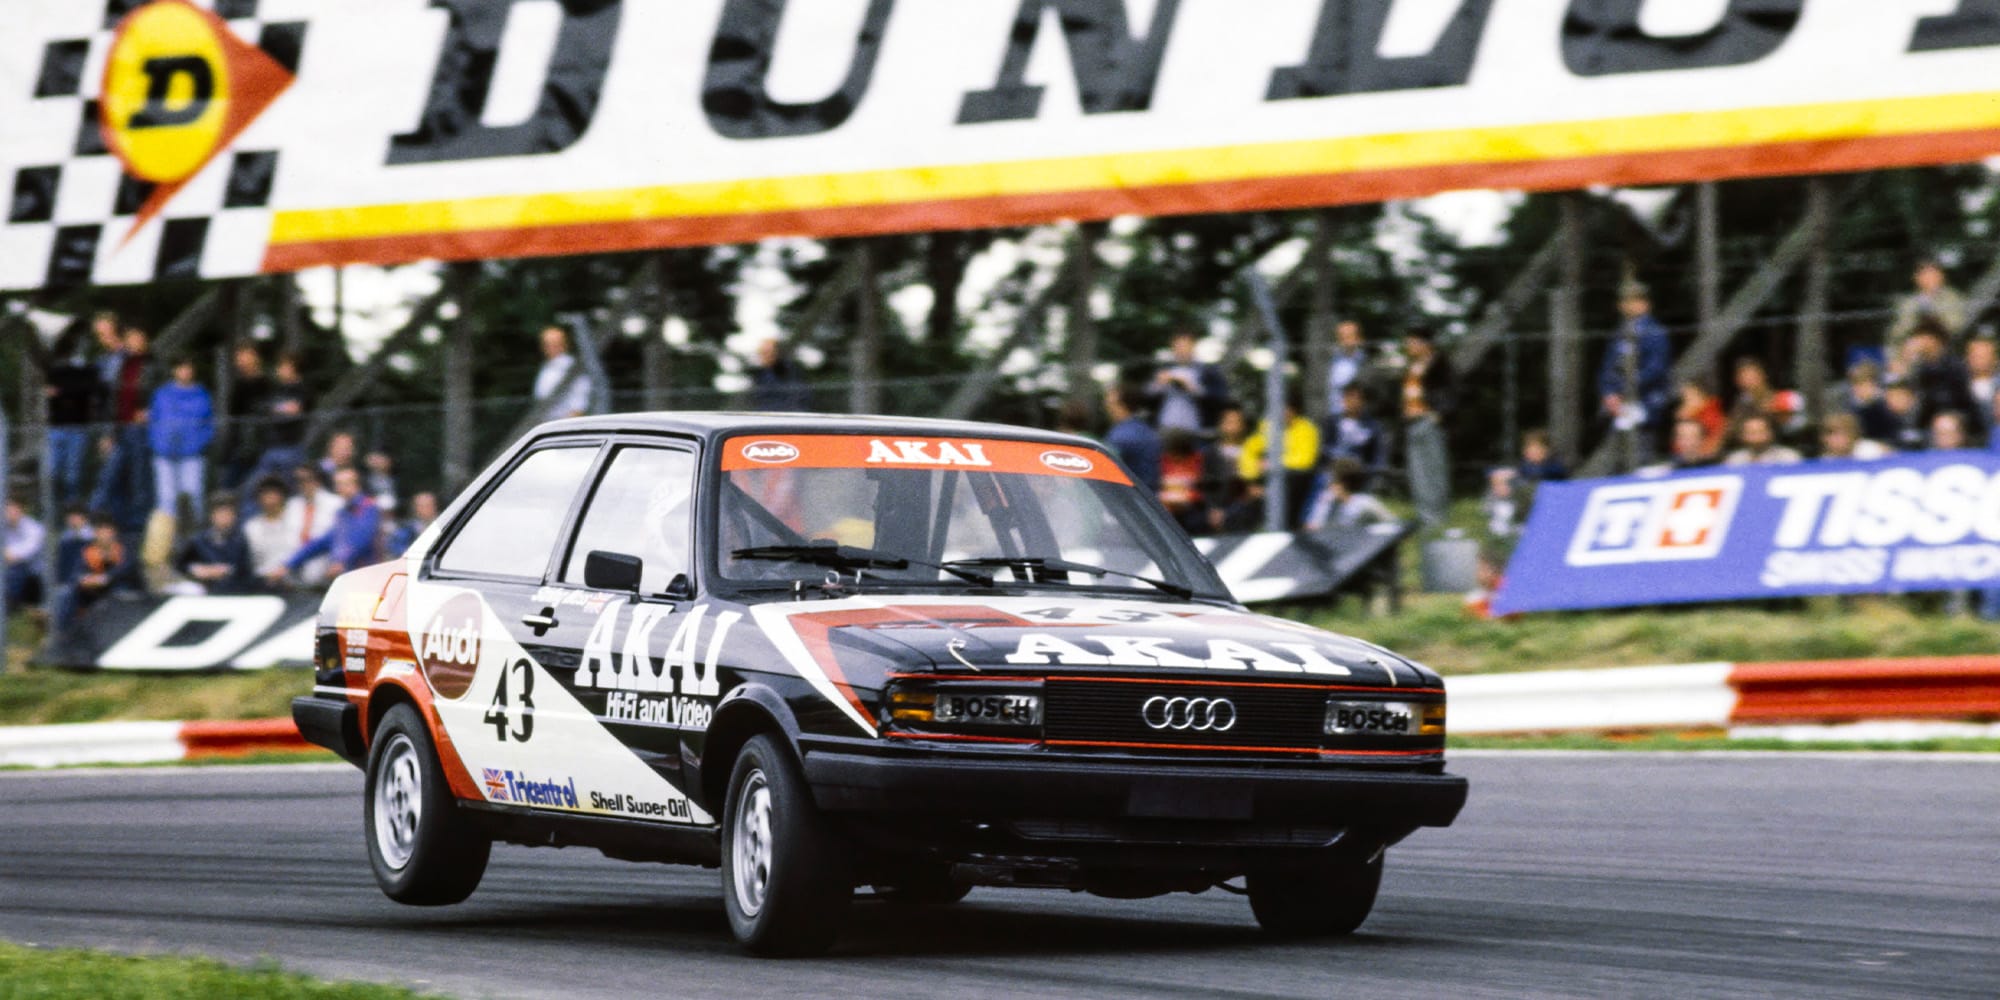 Stirling Moss' Audi lifts a wheel in the British Saloon Car Championship